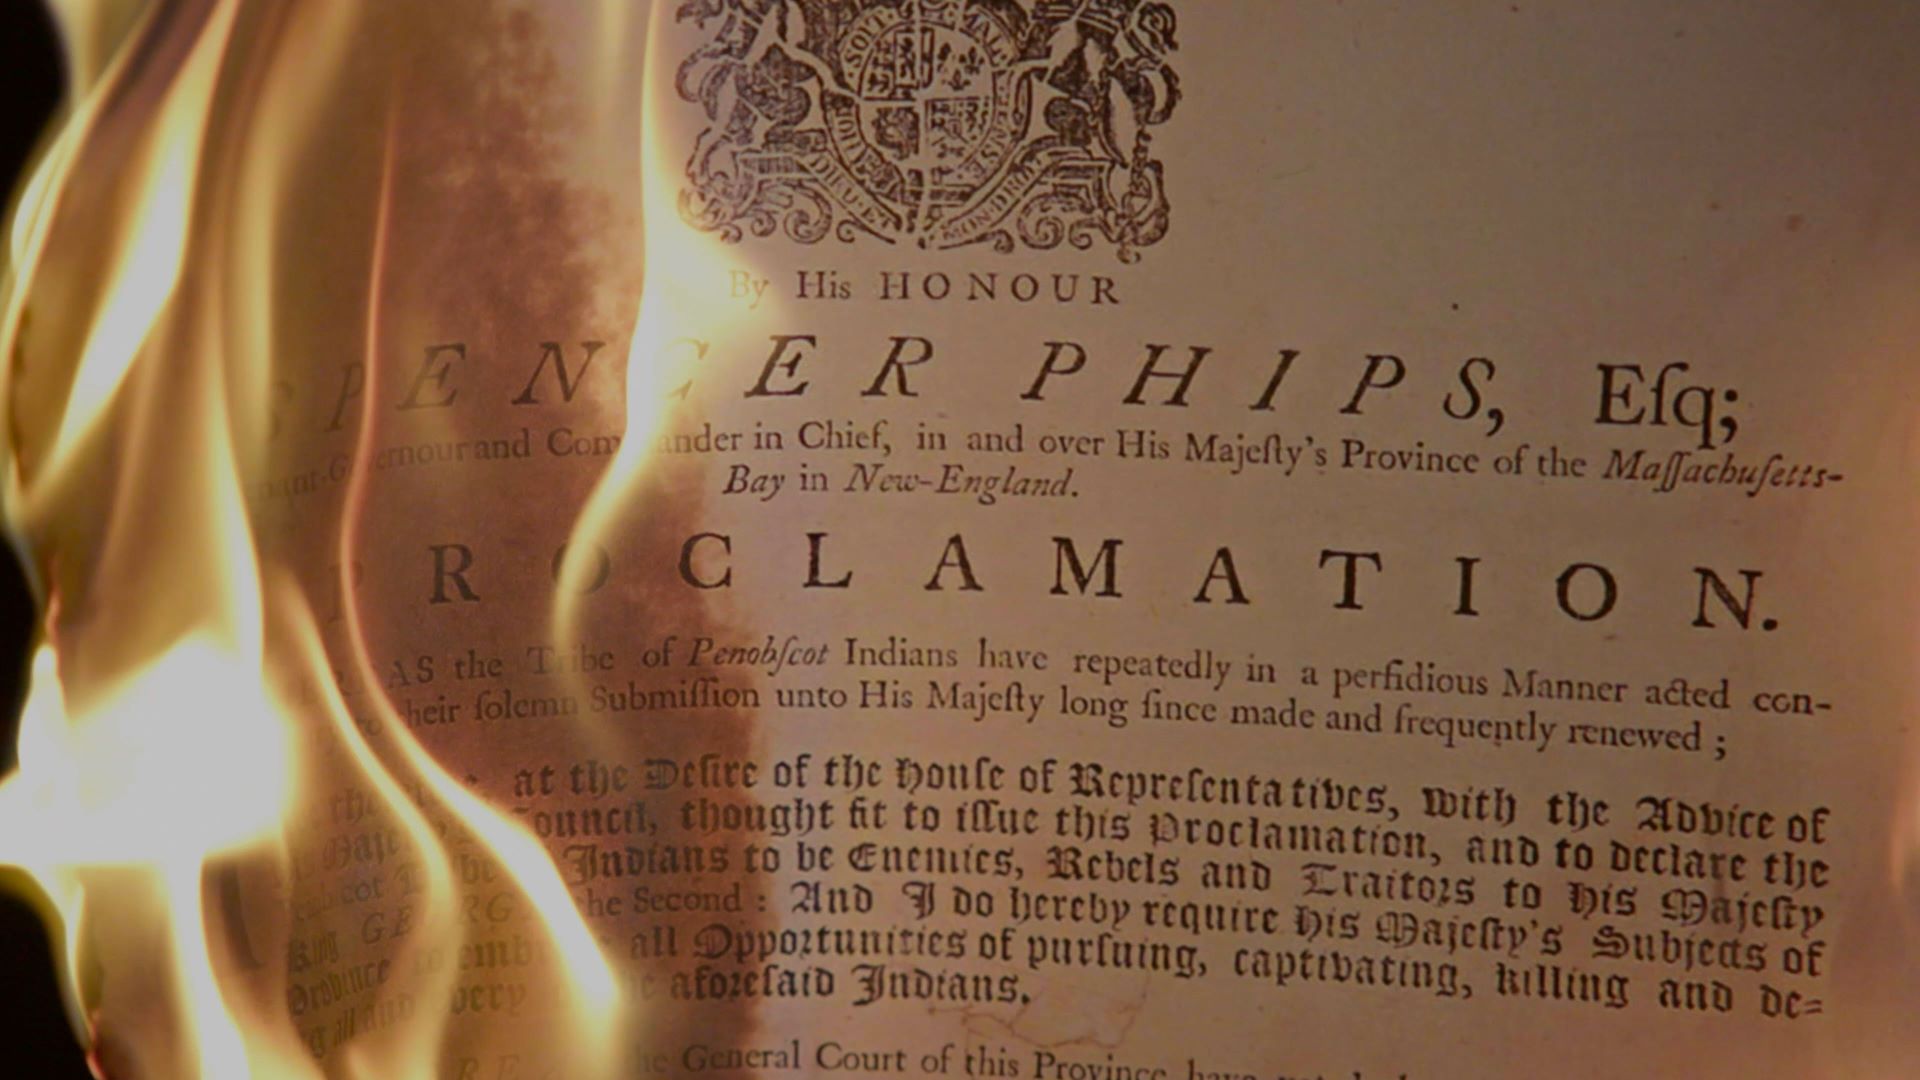 A copy of the Proclamation engulfed in flames. 